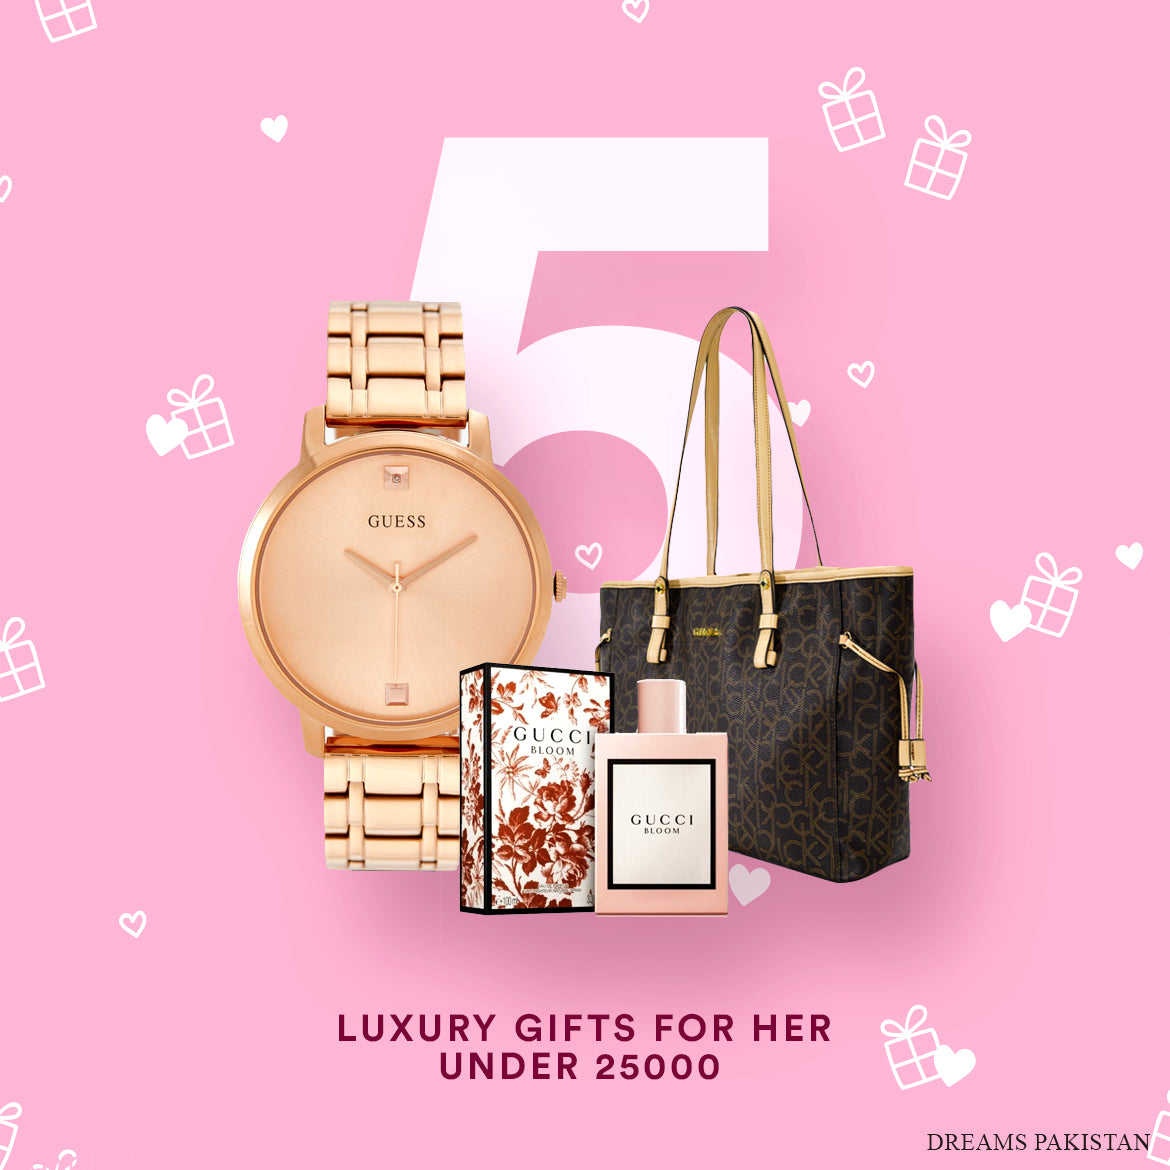 Aggregate 149+ luxury gifts for her